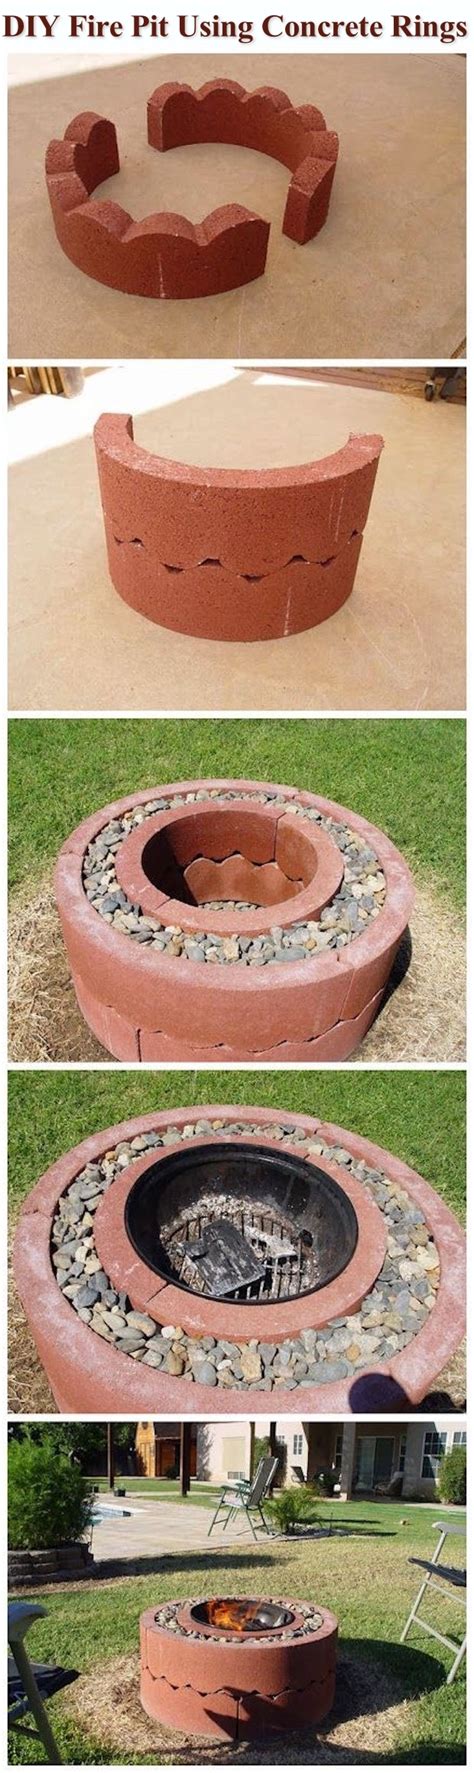 15 steel fire pit conversion ng (natural gas) or propane burner kit ring pit. How To Make A Fire Pit Using Concrete Rings Pictures ...